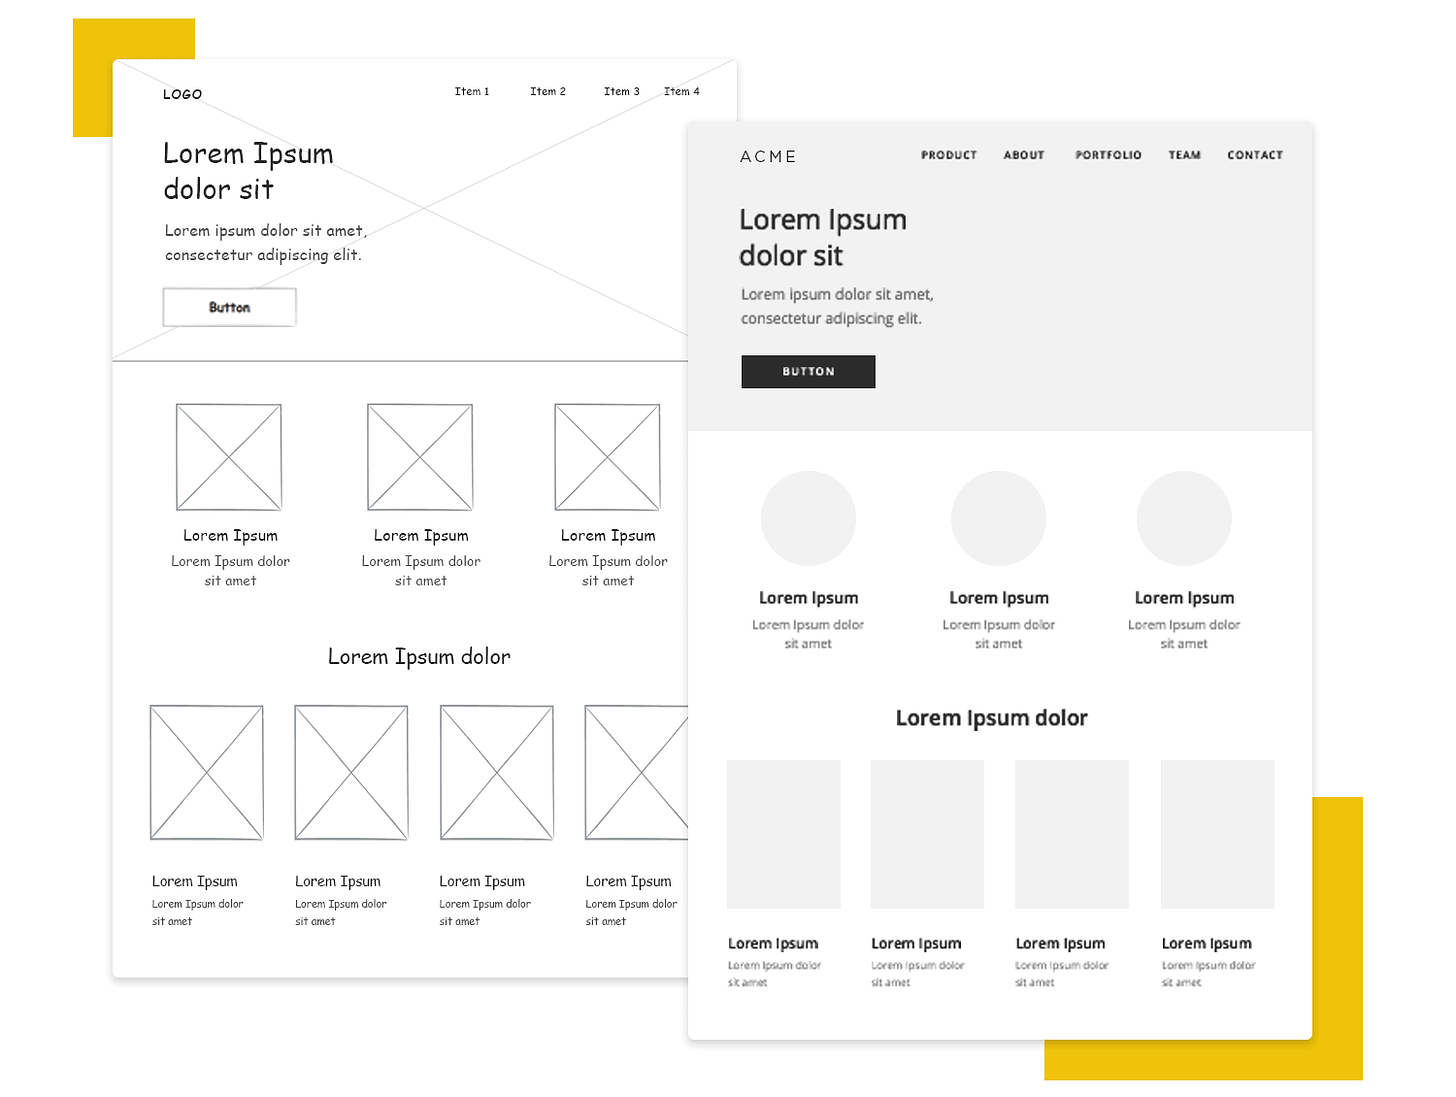 The guide to website wireframe design - Justinmind